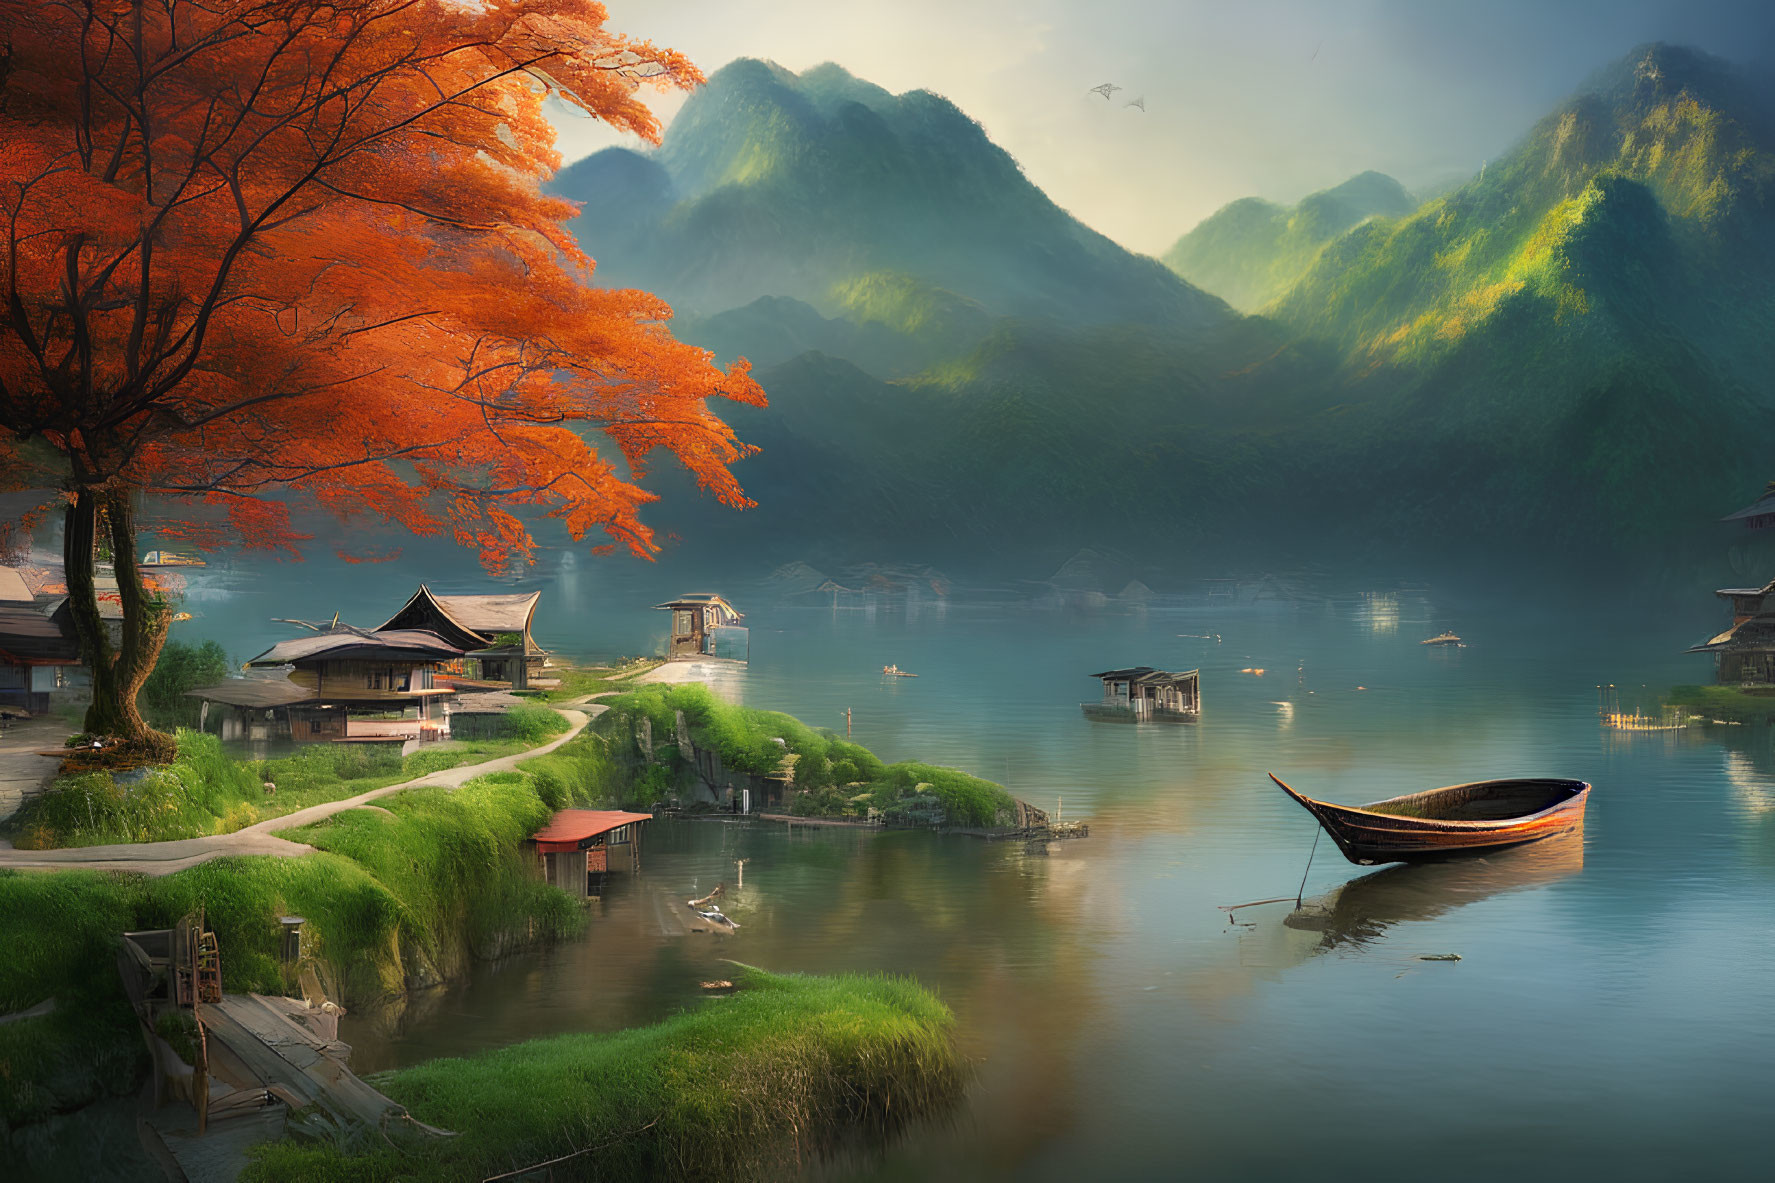 Tranquil lake scene with traditional buildings, lone boat, misty mountains, orange tree, soft